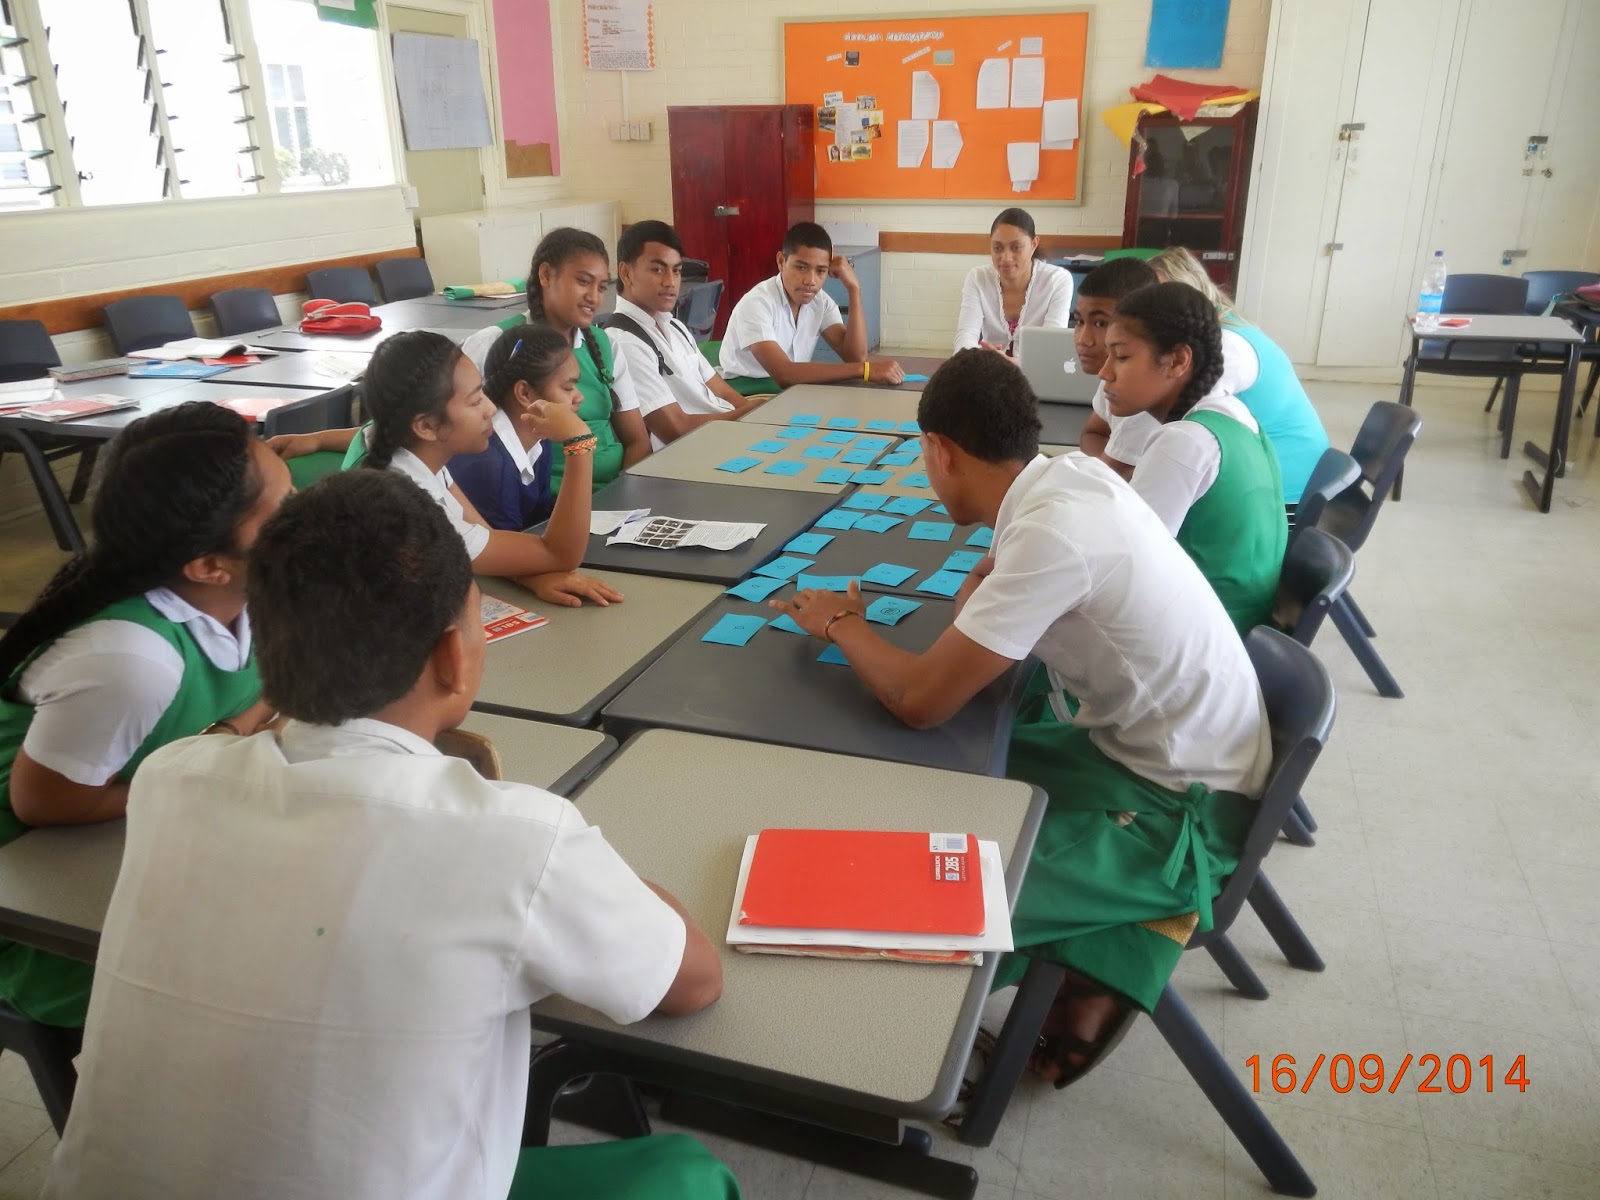 Island Chatter: Schools In Tonga